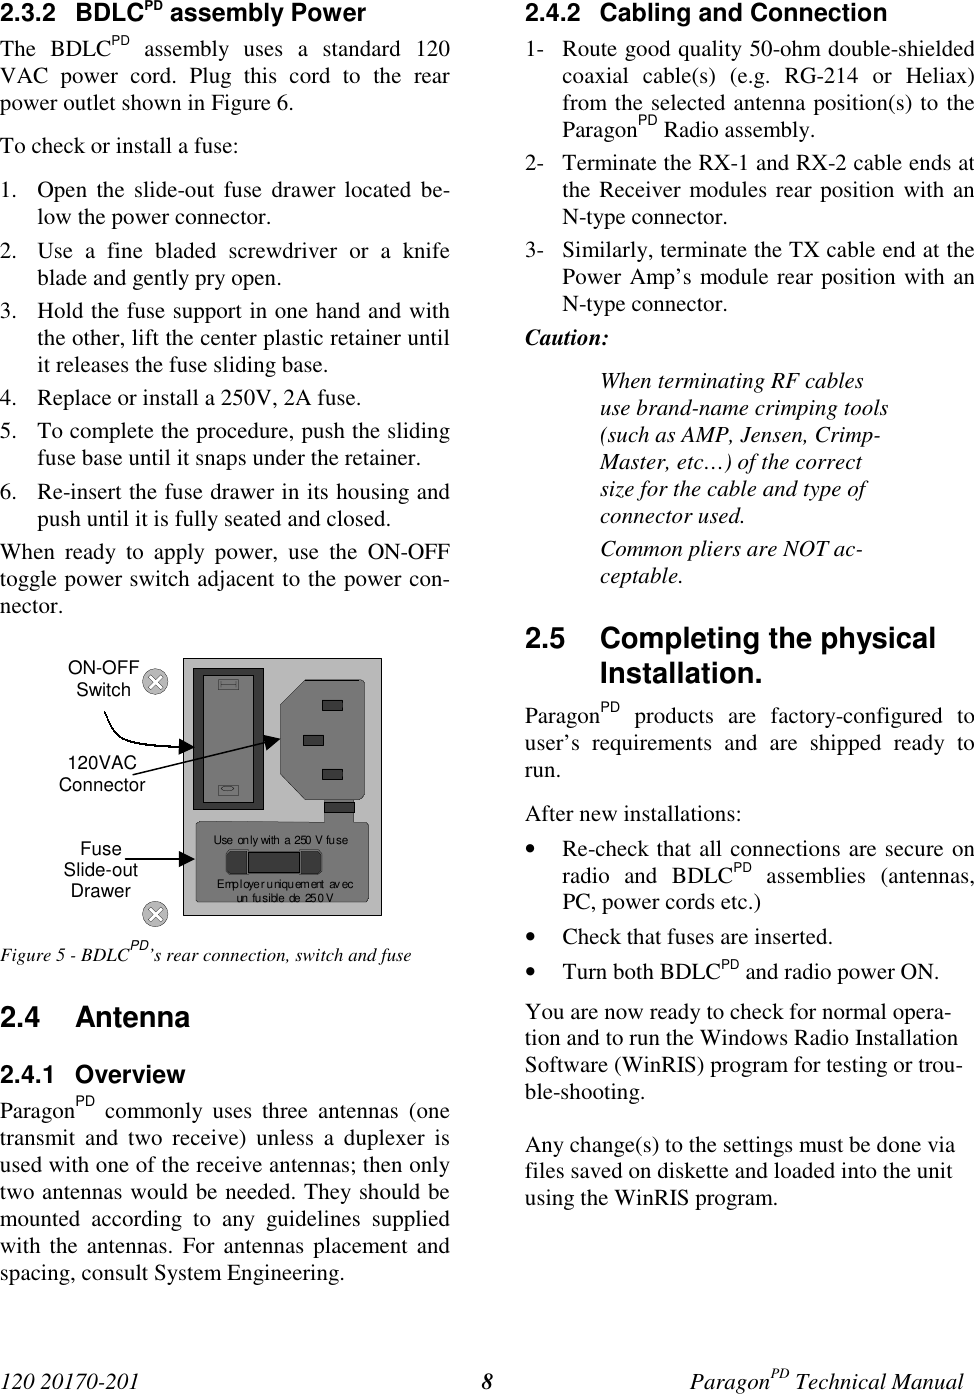 120 20170-201 ParagonPD Technical Manual82.3.2 BDLCPD assembly PowerThe BDLCPD assembly uses a standard 120VAC power cord. Plug this cord to the rearpower outlet shown in Figure 6.To check or install a fuse:1. Open the slide-out fuse drawer located be-low the power connector.2. Use a fine bladed screwdriver or a knifeblade and gently pry open.3. Hold the fuse support in one hand and withthe other, lift the center plastic retainer untilit releases the fuse sliding base.4. Replace or install a 250V, 2A fuse.5. To complete the procedure, push the slidingfuse base until it snaps under the retainer.6. Re-insert the fuse drawer in its housing andpush until it is fully seated and closed.When ready to apply power, use the ON-OFFtoggle power switch adjacent to the power con-nector.Figure 5 - BDLCPD’s rear connection, switch and fuse2.4 Antenna2.4.1 OverviewParagonPD commonly uses three antennas (onetransmit and two receive) unless a duplexer isused with one of the receive antennas; then onlytwo antennas would be needed. They should bemounted according to any guidelines suppliedwith the antennas. For antennas placement andspacing, consult System Engineering.2.4.2  Cabling and Connection1- Route good quality 50-ohm double-shieldedcoaxial cable(s) (e.g. RG-214 or Heliax)from the selected antenna position(s) to theParagonPD Radio assembly.2- Terminate the RX-1 and RX-2 cable ends atthe Receiver modules rear position with anN-type connector.3- Similarly, terminate the TX cable end at thePower Amp’s module rear position with anN-type connector.Caution:When terminating RF cablesuse brand-name crimping tools(such as AMP, Jensen, Crimp-Master, etc…) of the correctsize for the cable and type ofconnector used.Common pliers are NOT ac-ceptable.2.5  Completing the physicalInstallation.ParagonPD products are factory-configured touser’s requirements and are shipped ready torun.After new installations:• Re-check that all connections are secure onradio and BDLCPD assemblies (antennas,PC, power cords etc.)• Check that fuses are inserted.• Turn both BDLCPD and radio power ON.You are now ready to check for normal opera-tion and to run the Windows Radio InstallationSoftware (WinRIS) program for testing or trou-ble-shooting.Any change(s) to the settings must be done viafiles saved on diskette and loaded into the unitusing the WinRIS program.Employer uniquement  avecun  fu s ible  de  25 0 VUse only with  a  250 V fu seON-OFFSwitch120VACConnectorFuseSlide-outDrawer